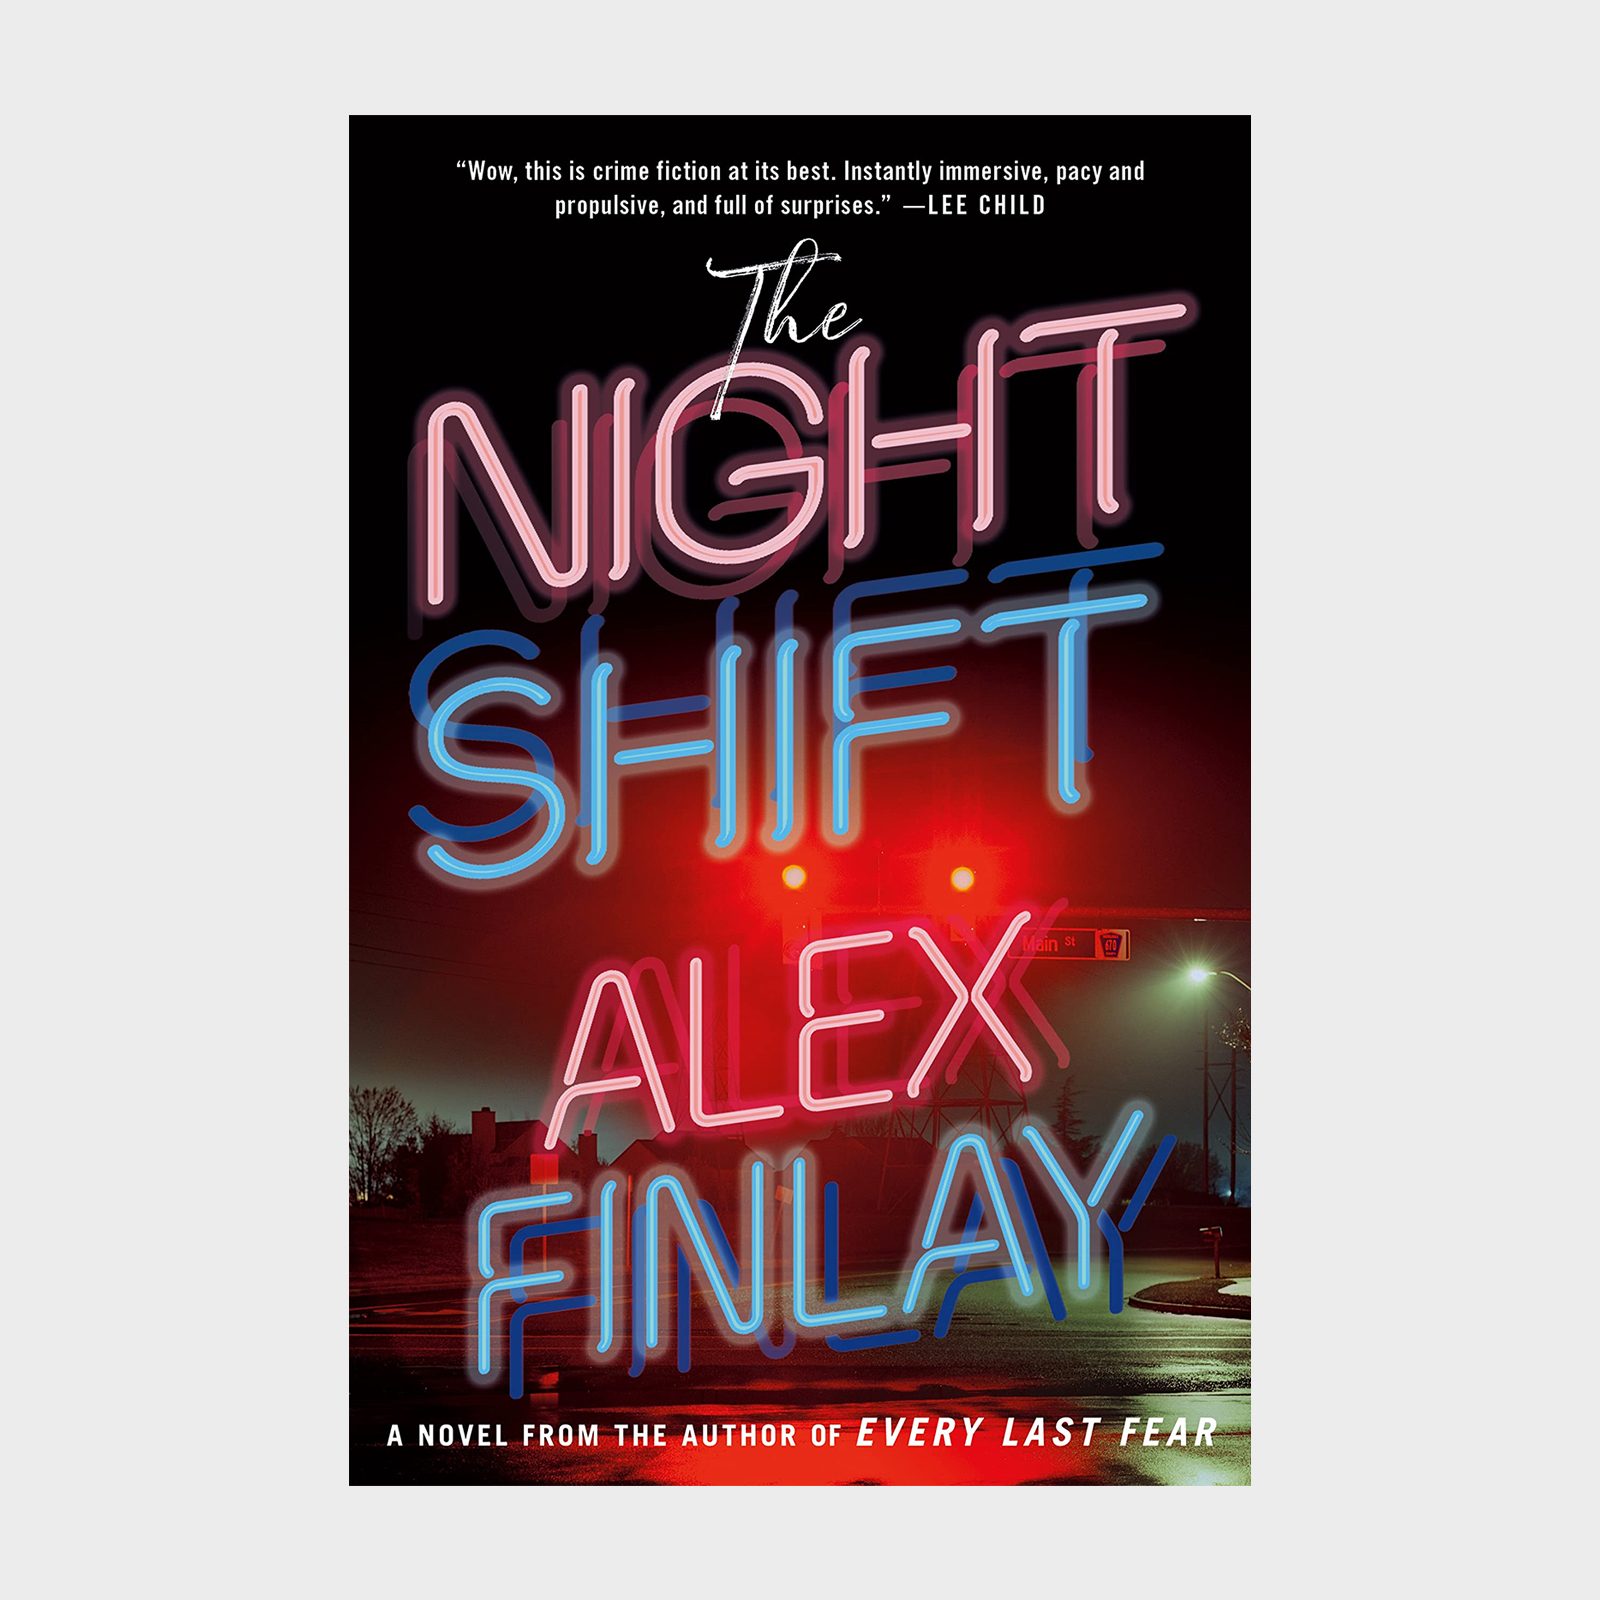 <p><strong>Release date:</strong> Mar. 1, 2022</p> <p>Alex Finlay's <a href="https://www.amazon.com/Night-Shift-Novel-Alex-Finlay/dp/1250268885" rel="noopener noreferrer">twisty new thriller</a> follows the intersecting lives of two victims of murder attempts. One narrowly escaped a tragic night shift at a Blockbuster on the eve of Y2K. The other lives through a harrowing night shift at an ice cream parlor in the same town 15 years later. Are the attempted slayings connected? What are the police missing? And is reliving the traumatic stories worth it to find out? Encompassing the genres of thriller, mystery and <a href="https://www.rd.com/list/scariest-books/" rel="noopener noreferrer">horror</a>, <em>The Night Shift</em> is a novel that will stick with you.</p> <p class="listicle-page__cta-button-shop"><a class="shop-btn" href="https://www.amazon.com/Night-Shift-Novel-Alex-Finlay/dp/1250268885">Shop Now</a></p>